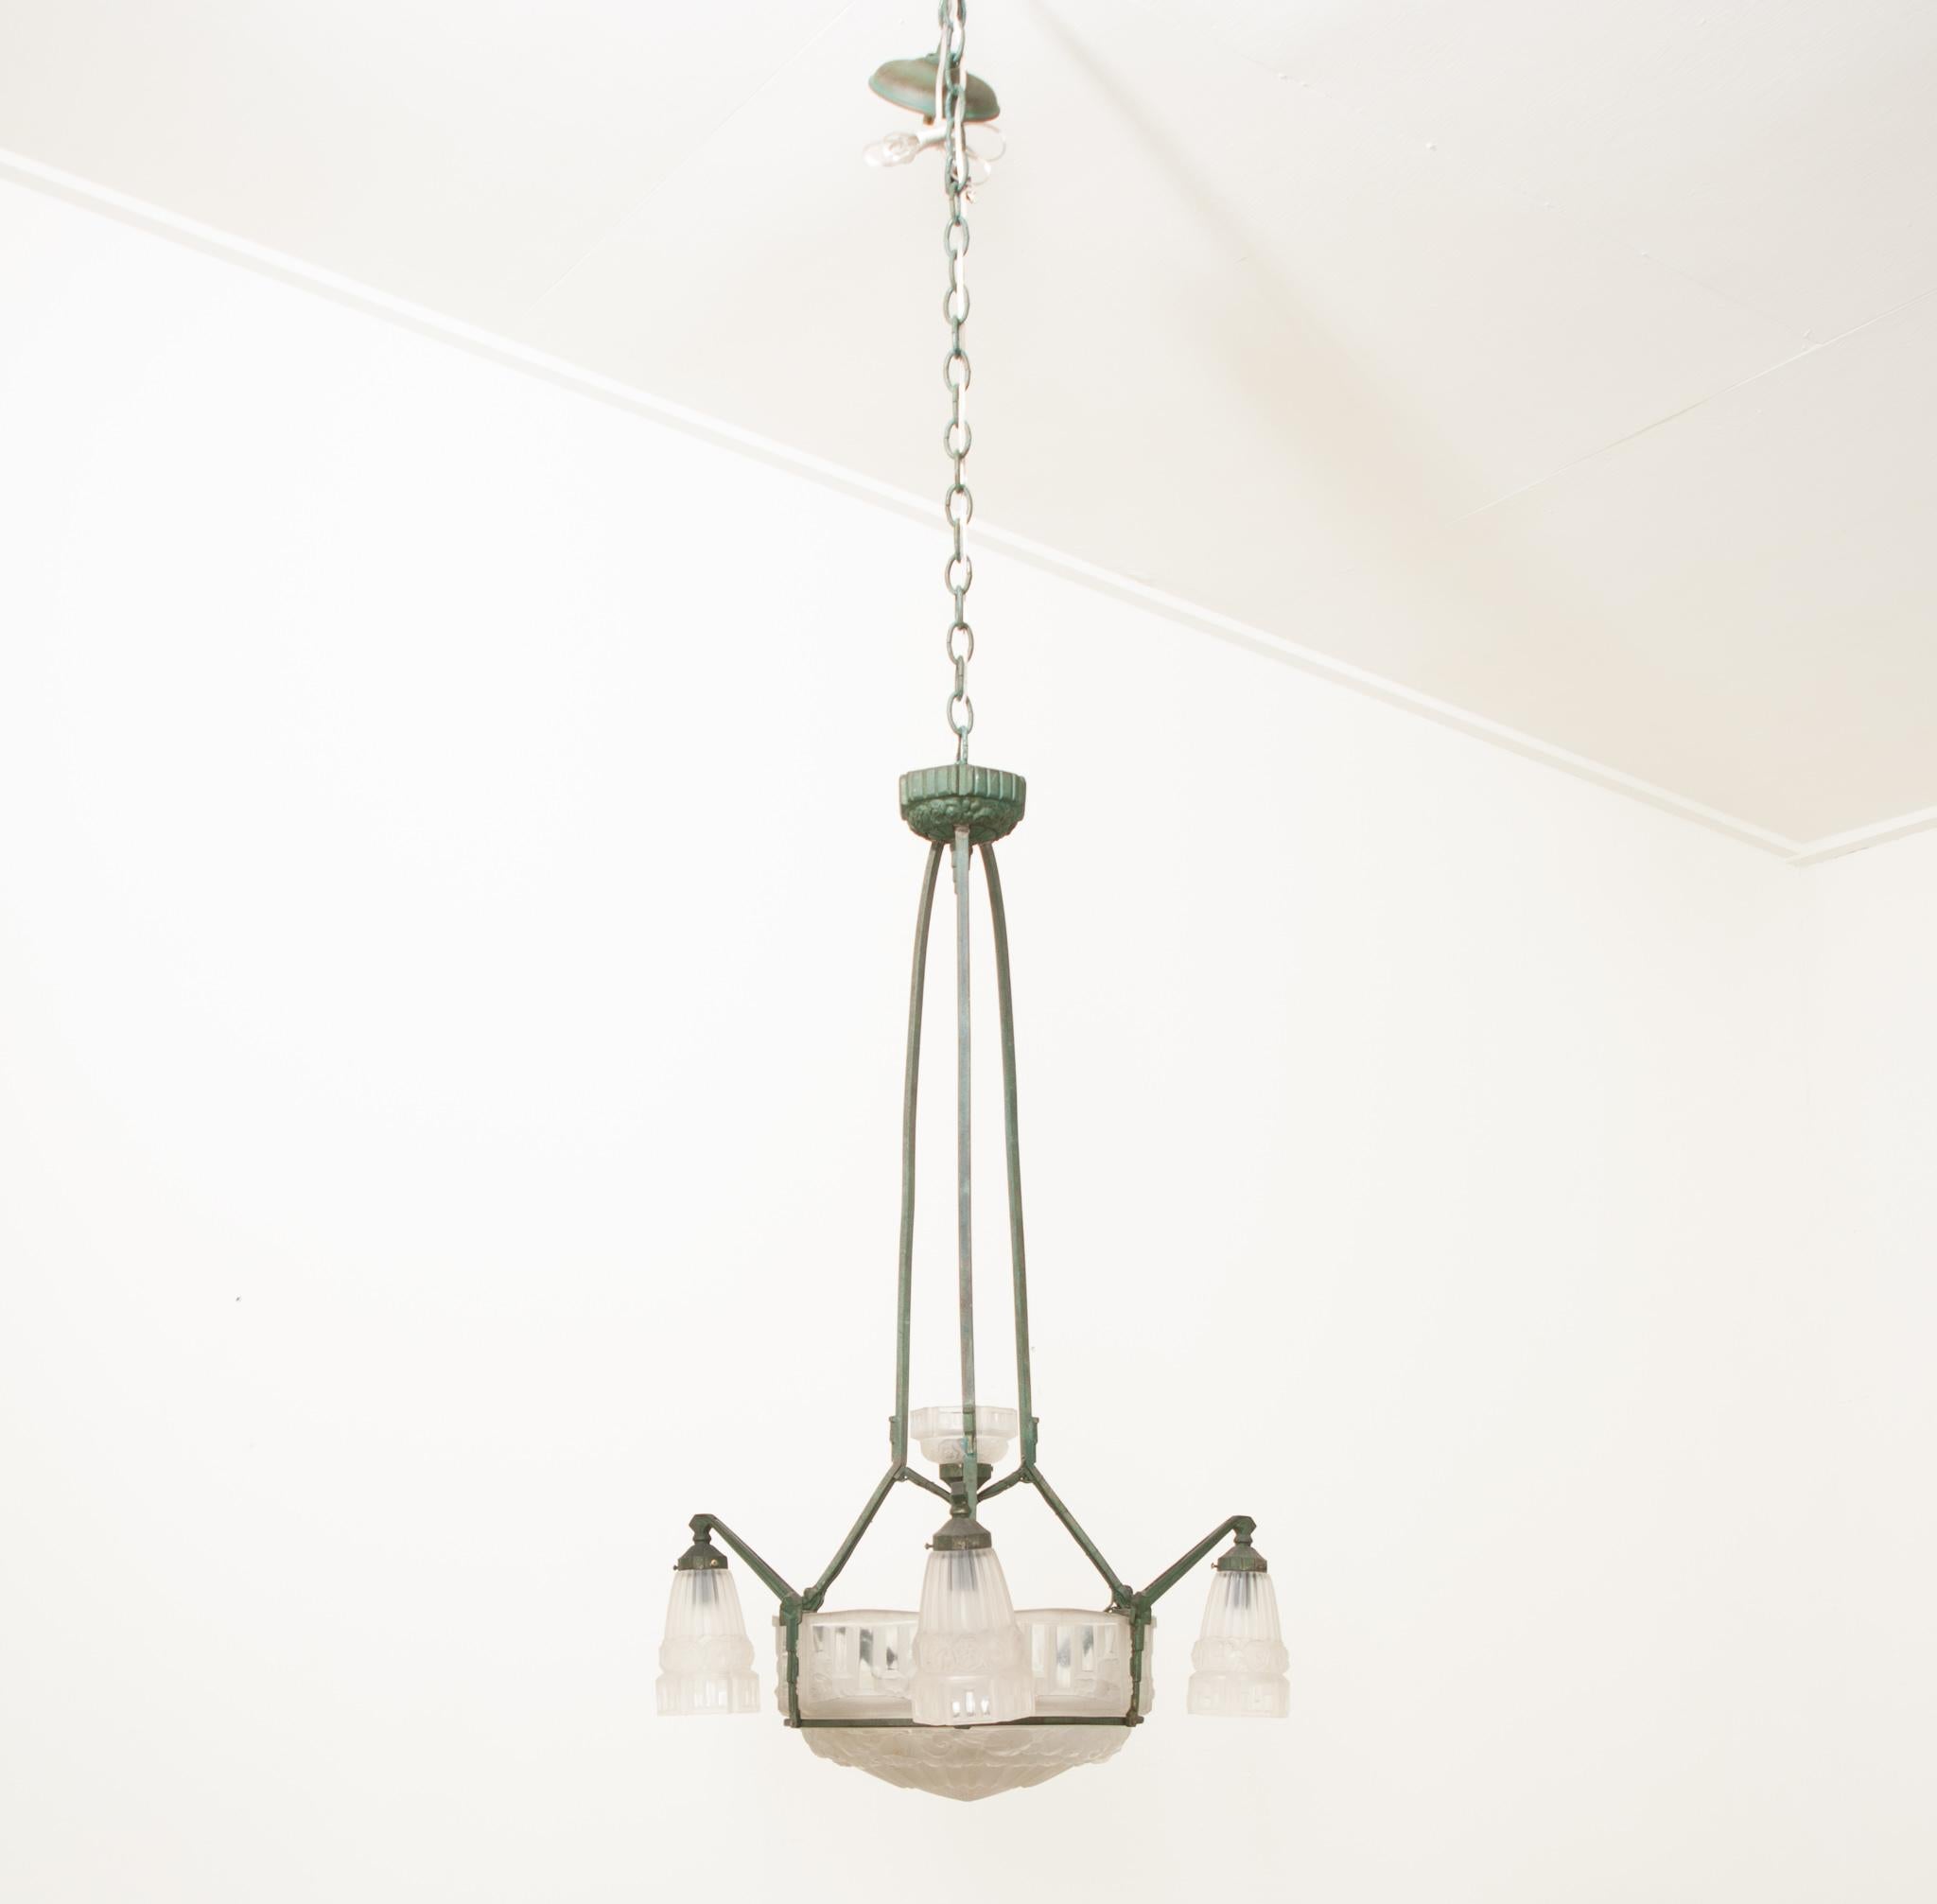 Metalwork French 20th Century Art Deco Chandelier For Sale